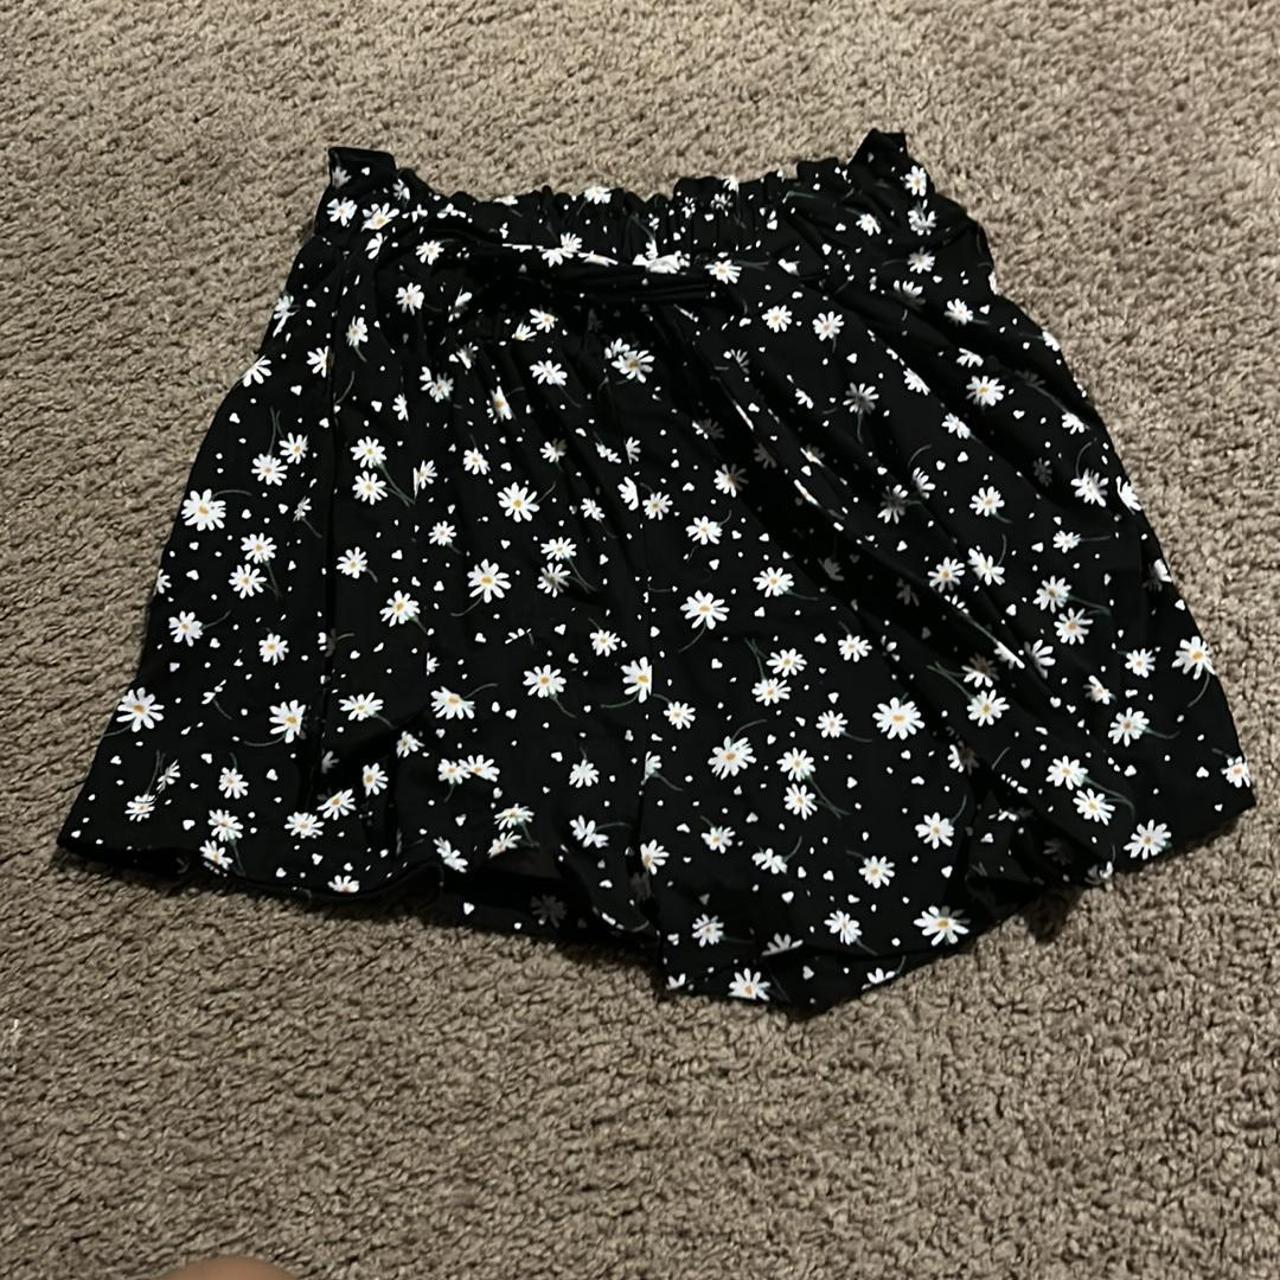 Black kids shorts with flowers in size XL - Depop